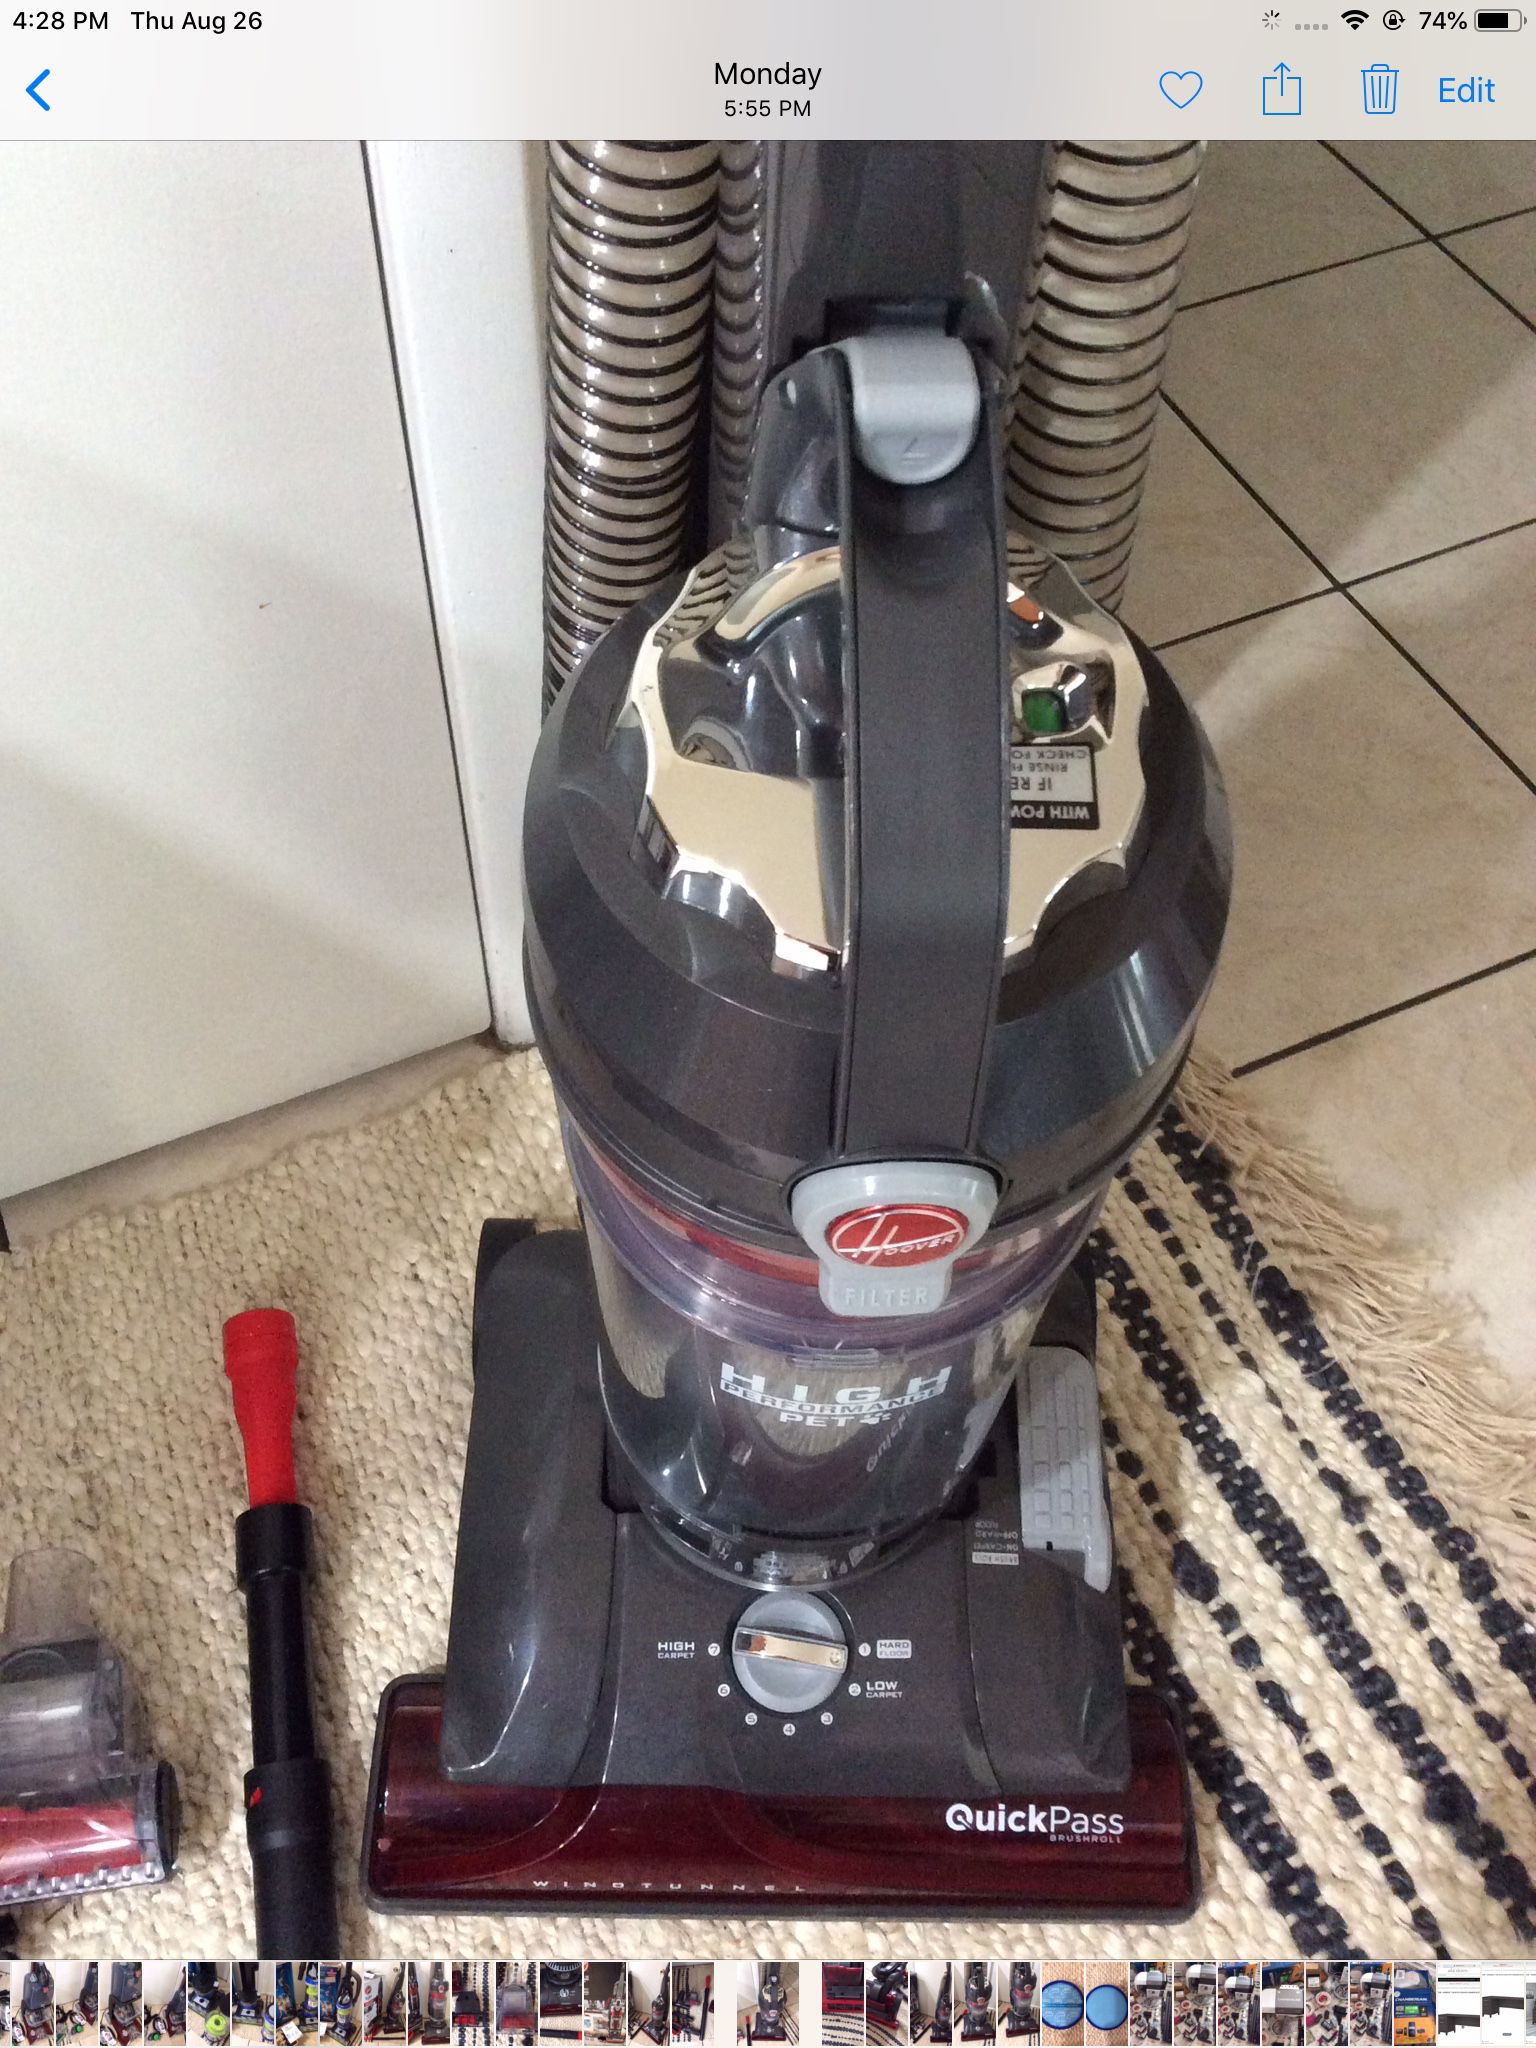 HOOVER Vacuum High Performance Pet...the Best Cleaning Upright Great For Pets Hair And No Loss Of Suction